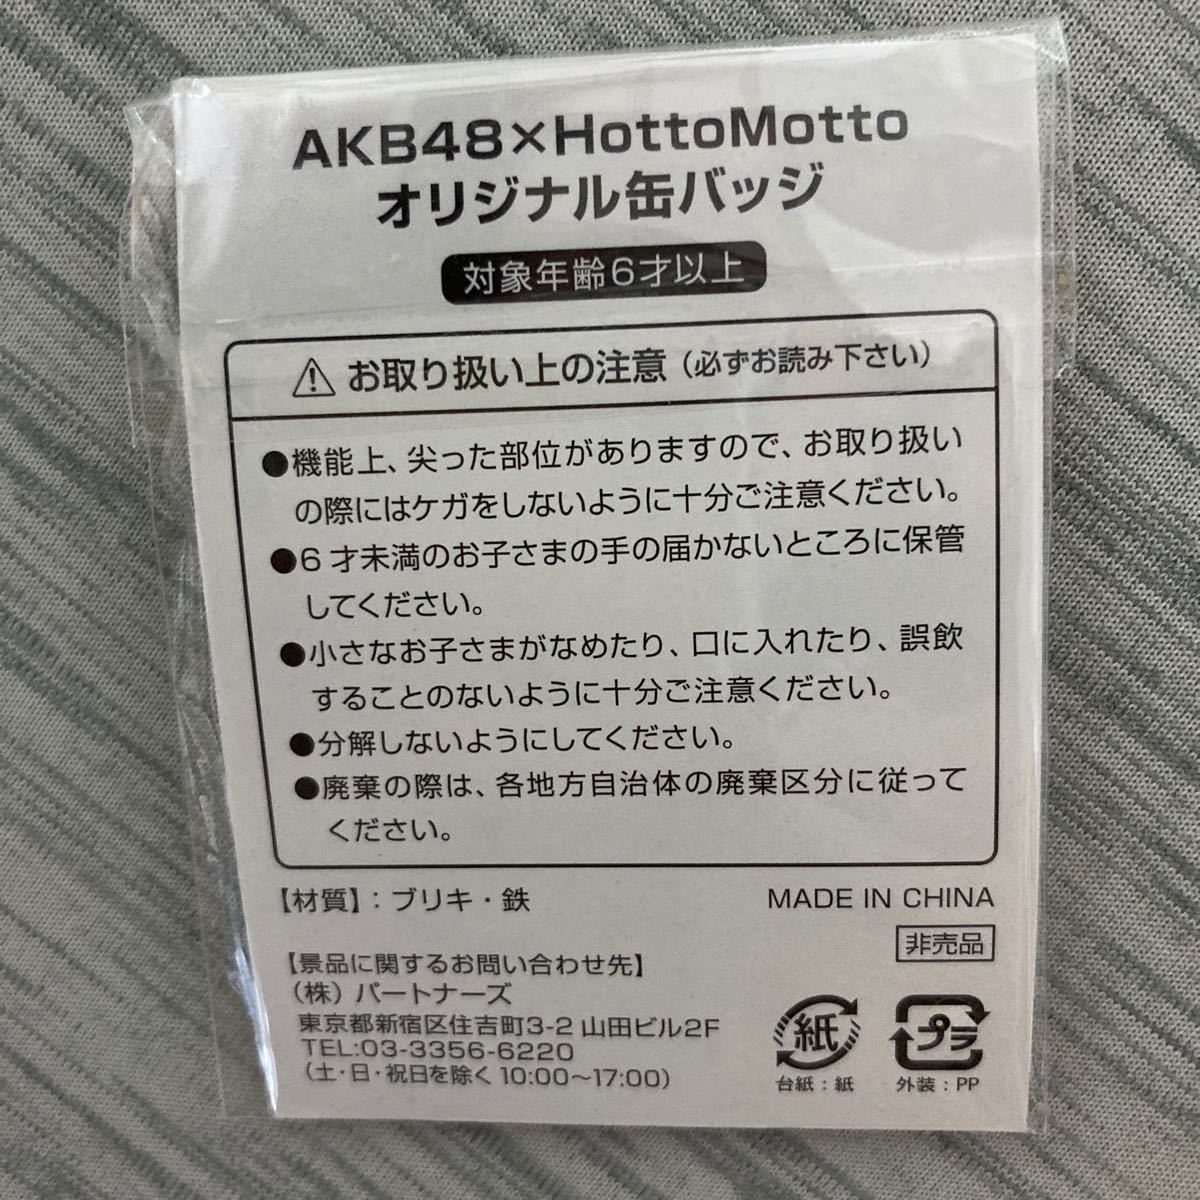 AKB48 × Hotto Motto オリジナル 缶バッジ